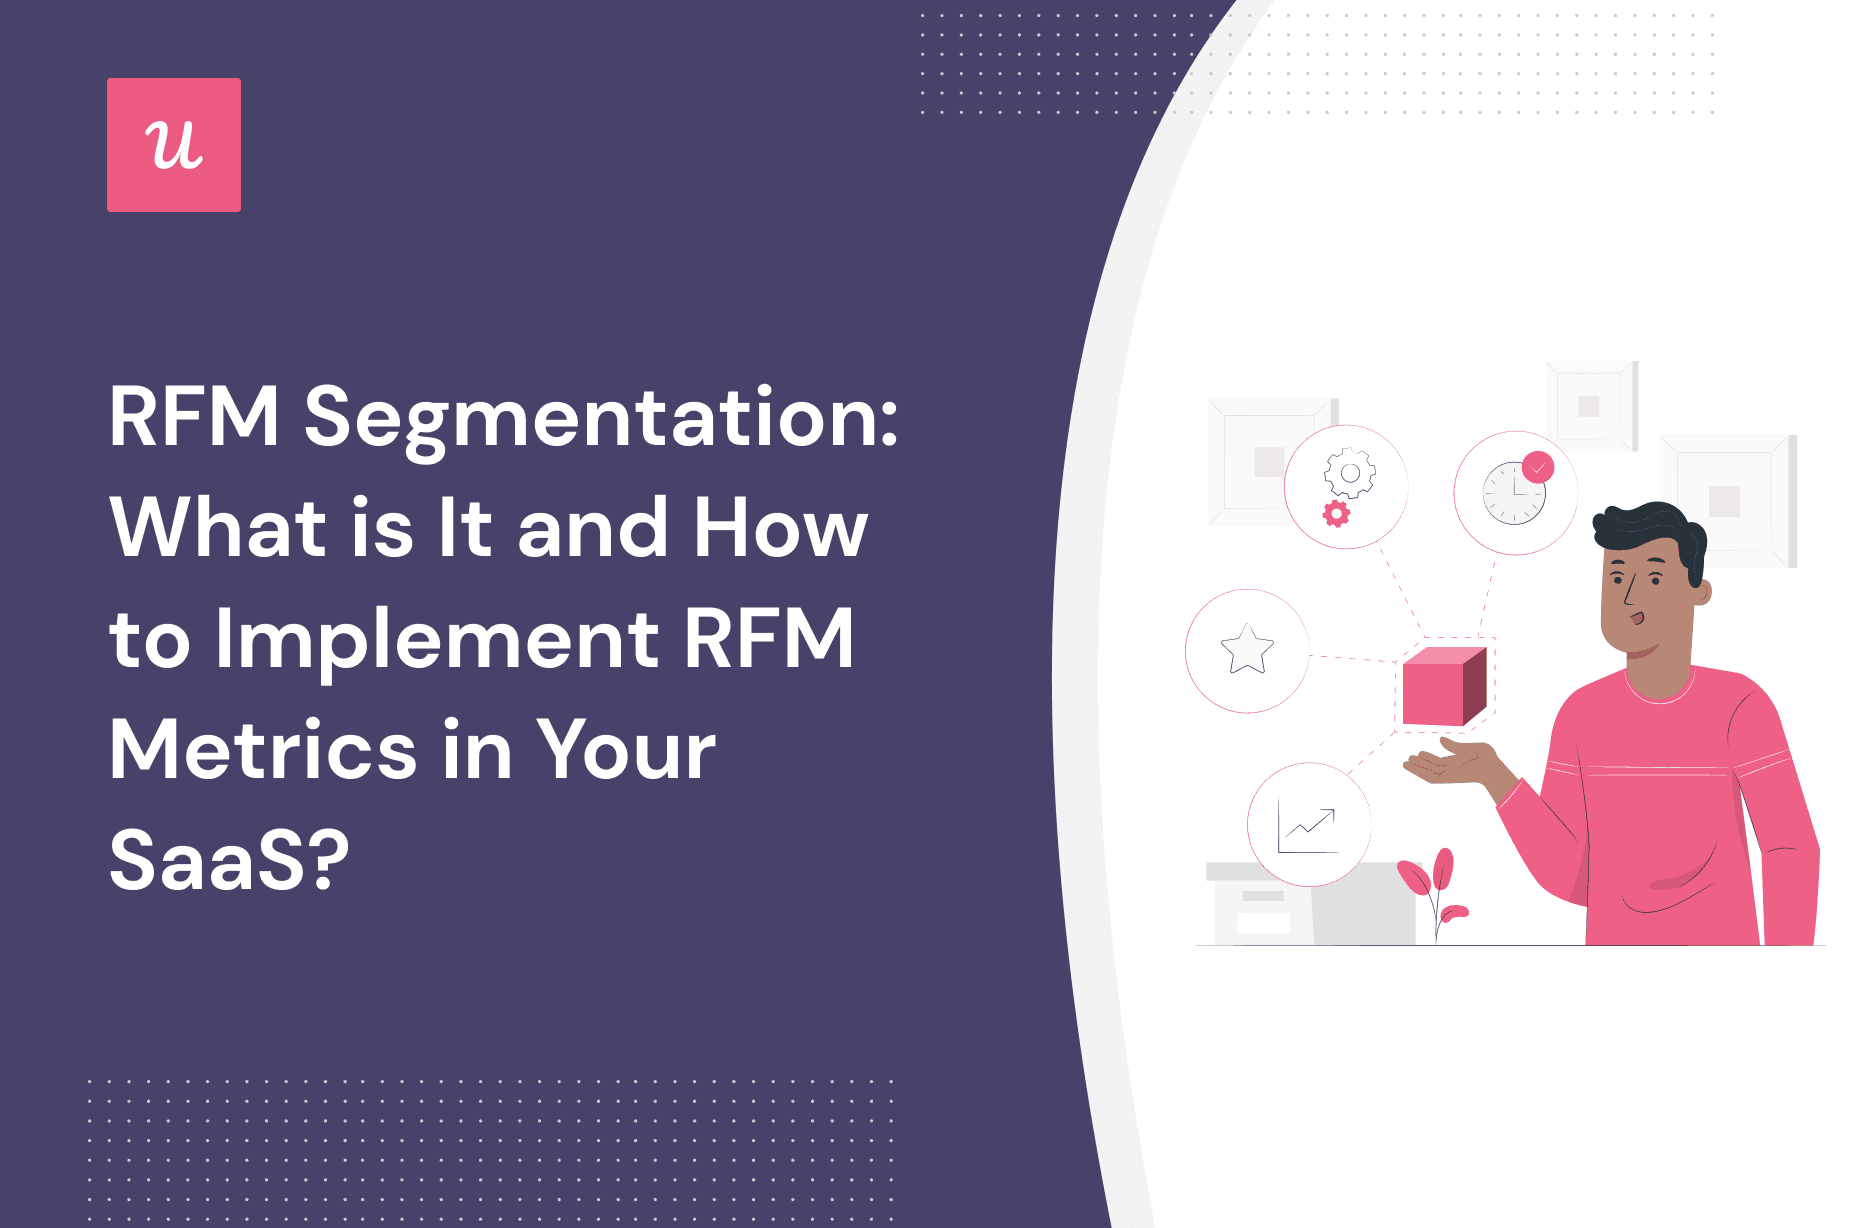 RFM-Segmentation-What-is-It-and-How-to-Implement-RFM-Metrics-in-Your-SaaS